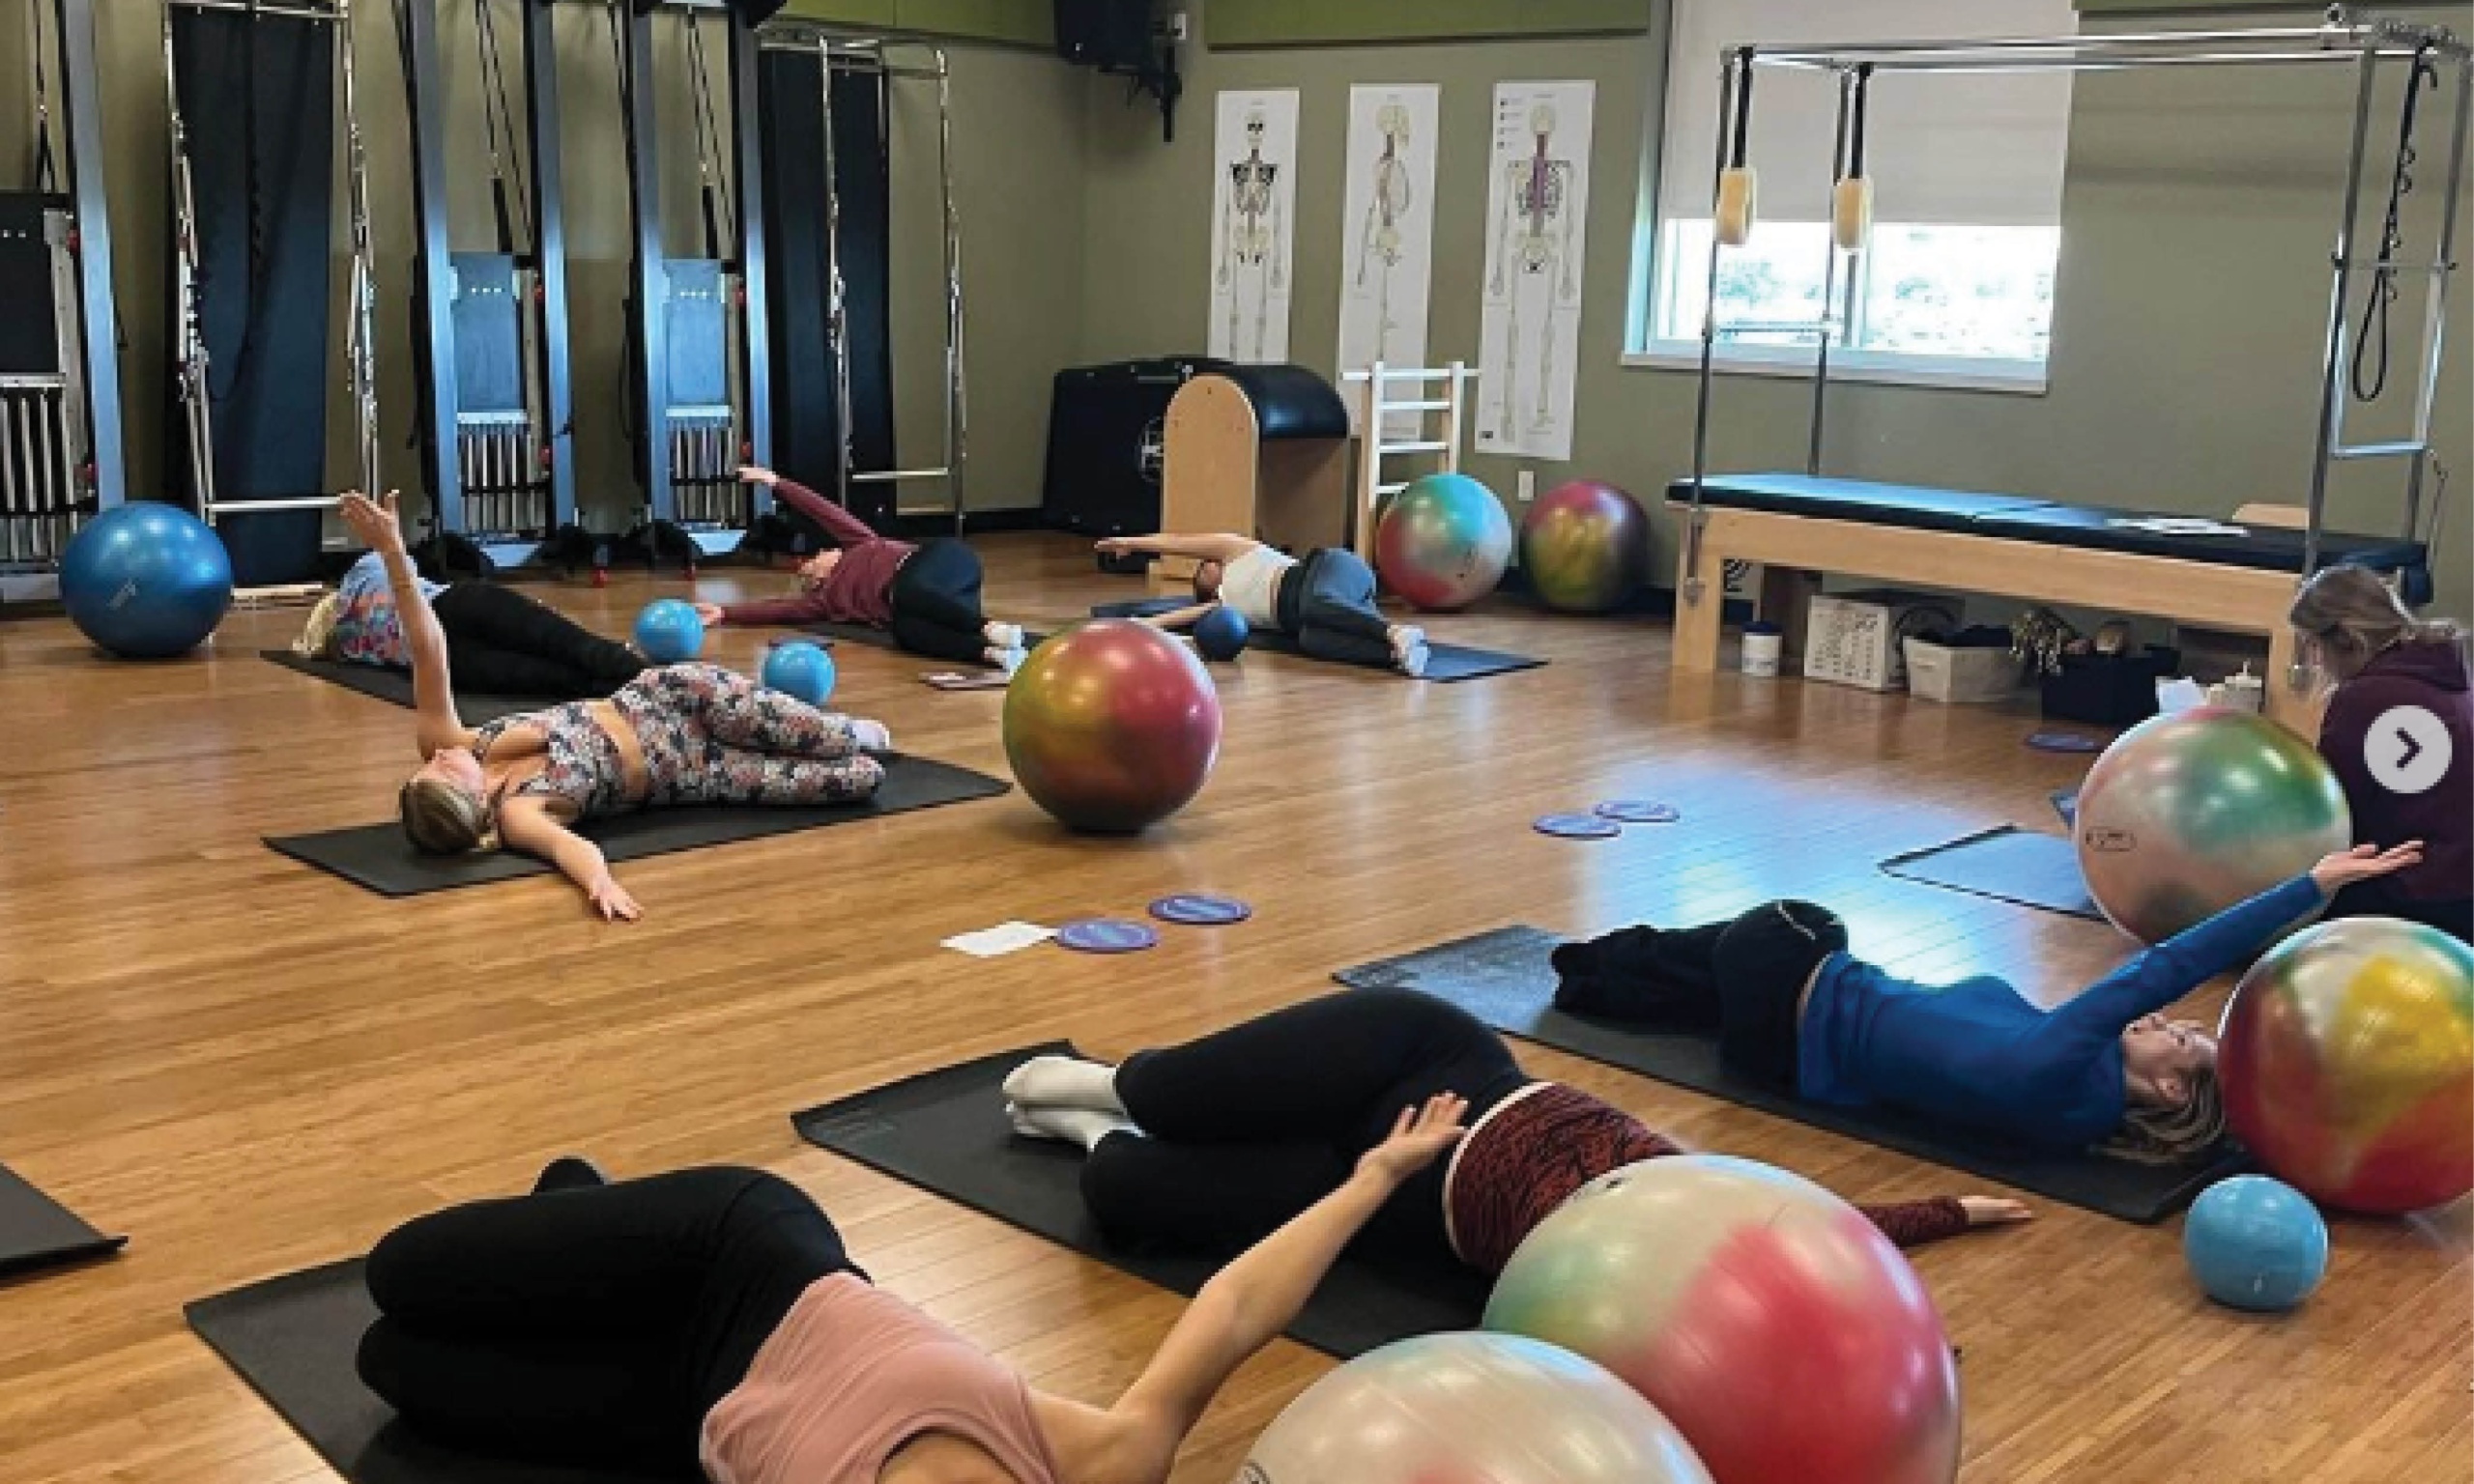 A group of people doing pilates in a room with yoga balls.